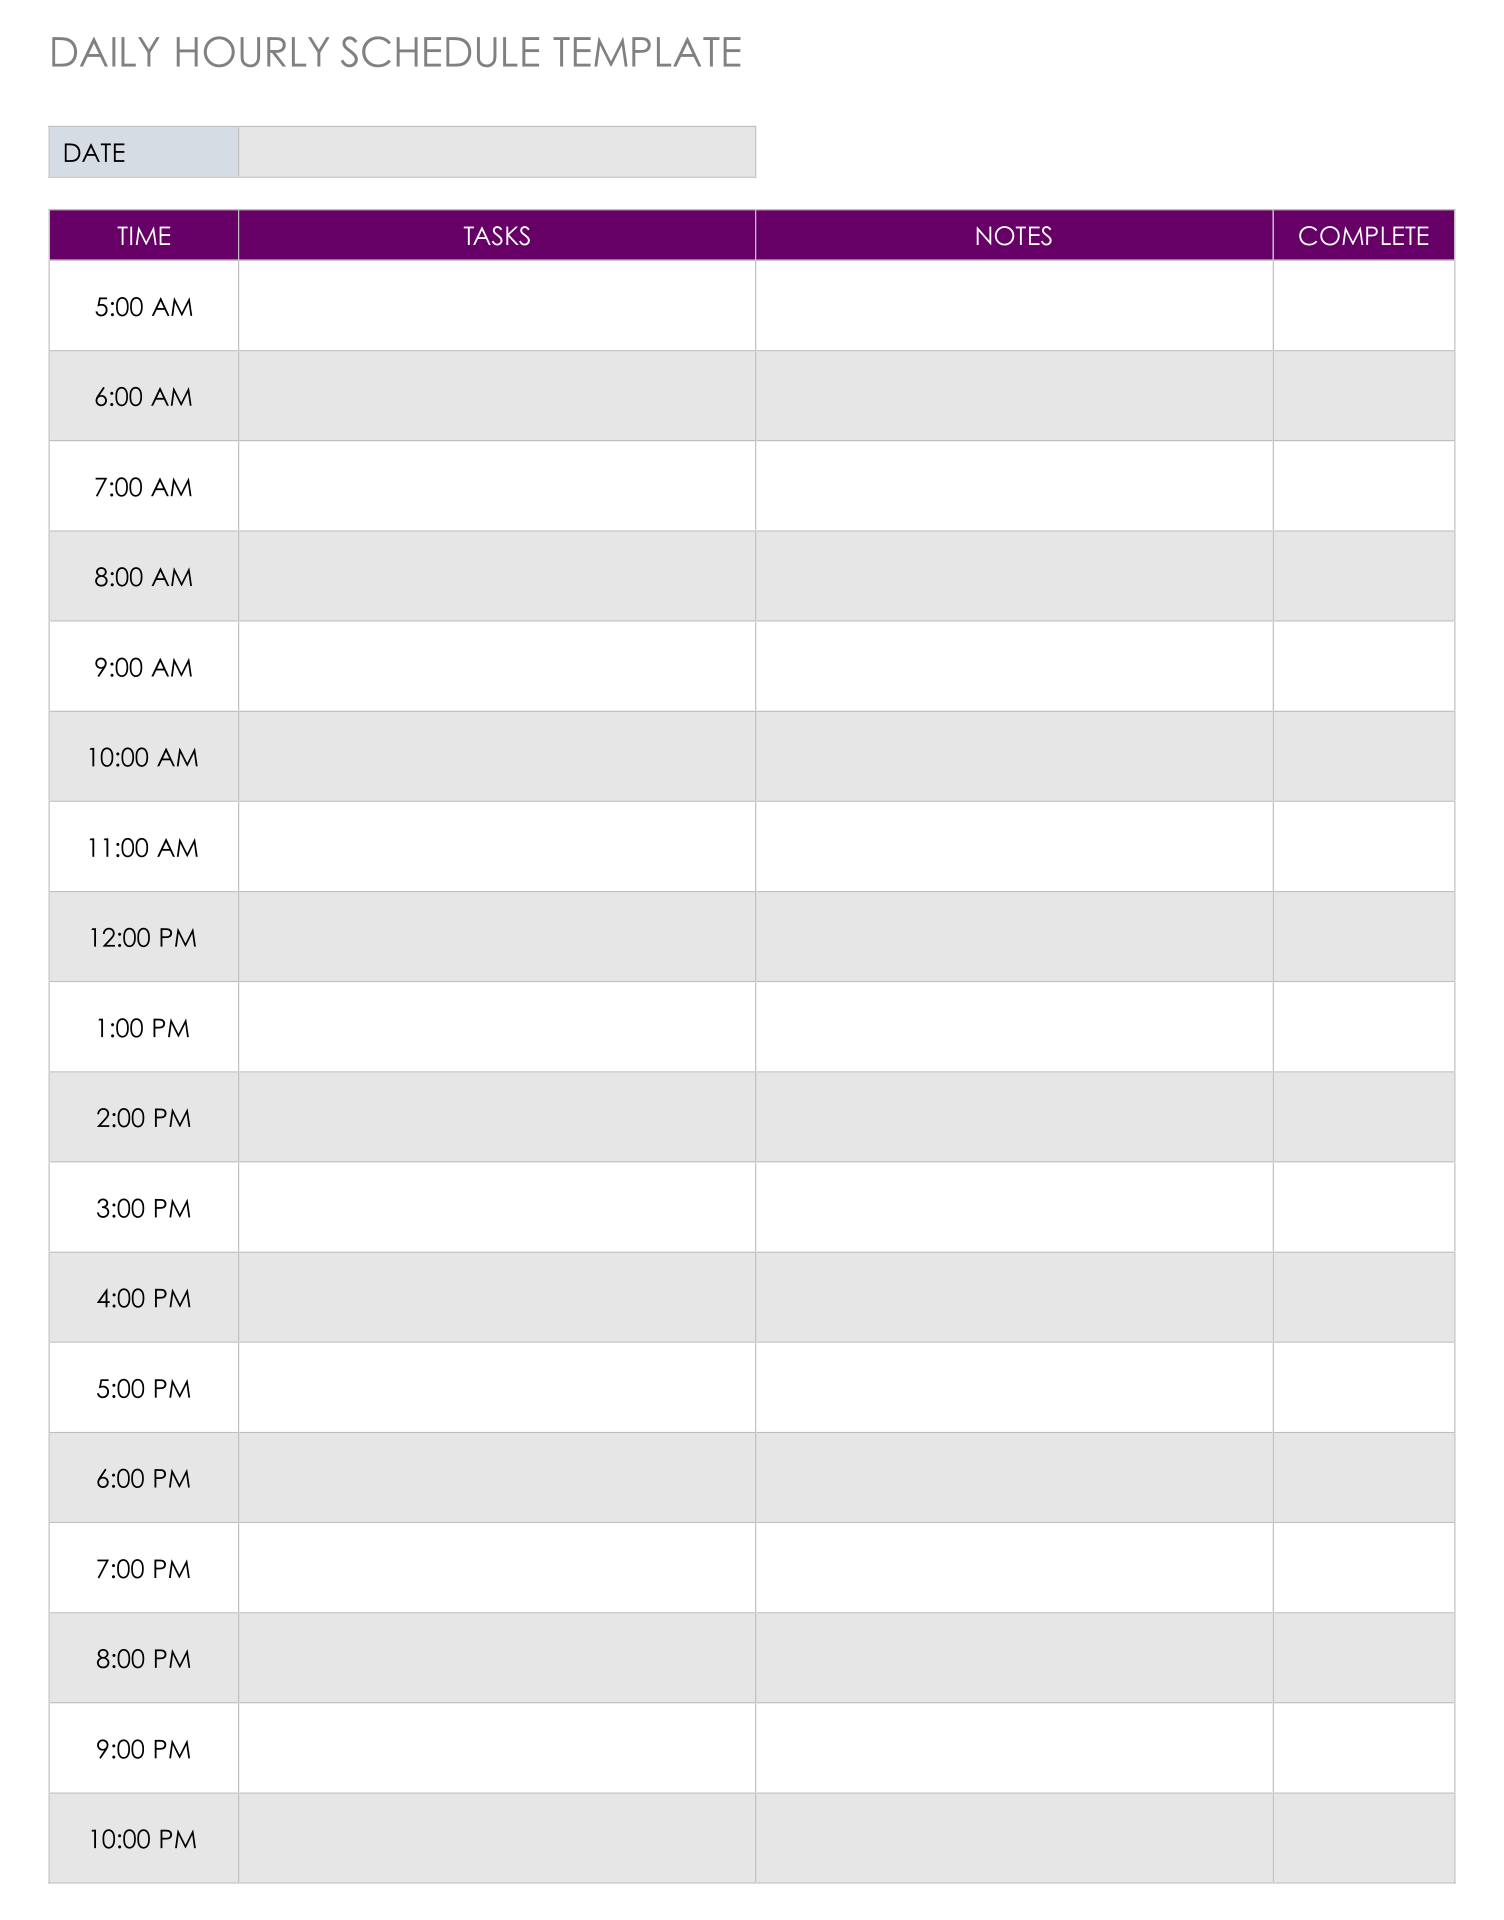 Printable Daily Hourly Schedule Template - Printable Templates